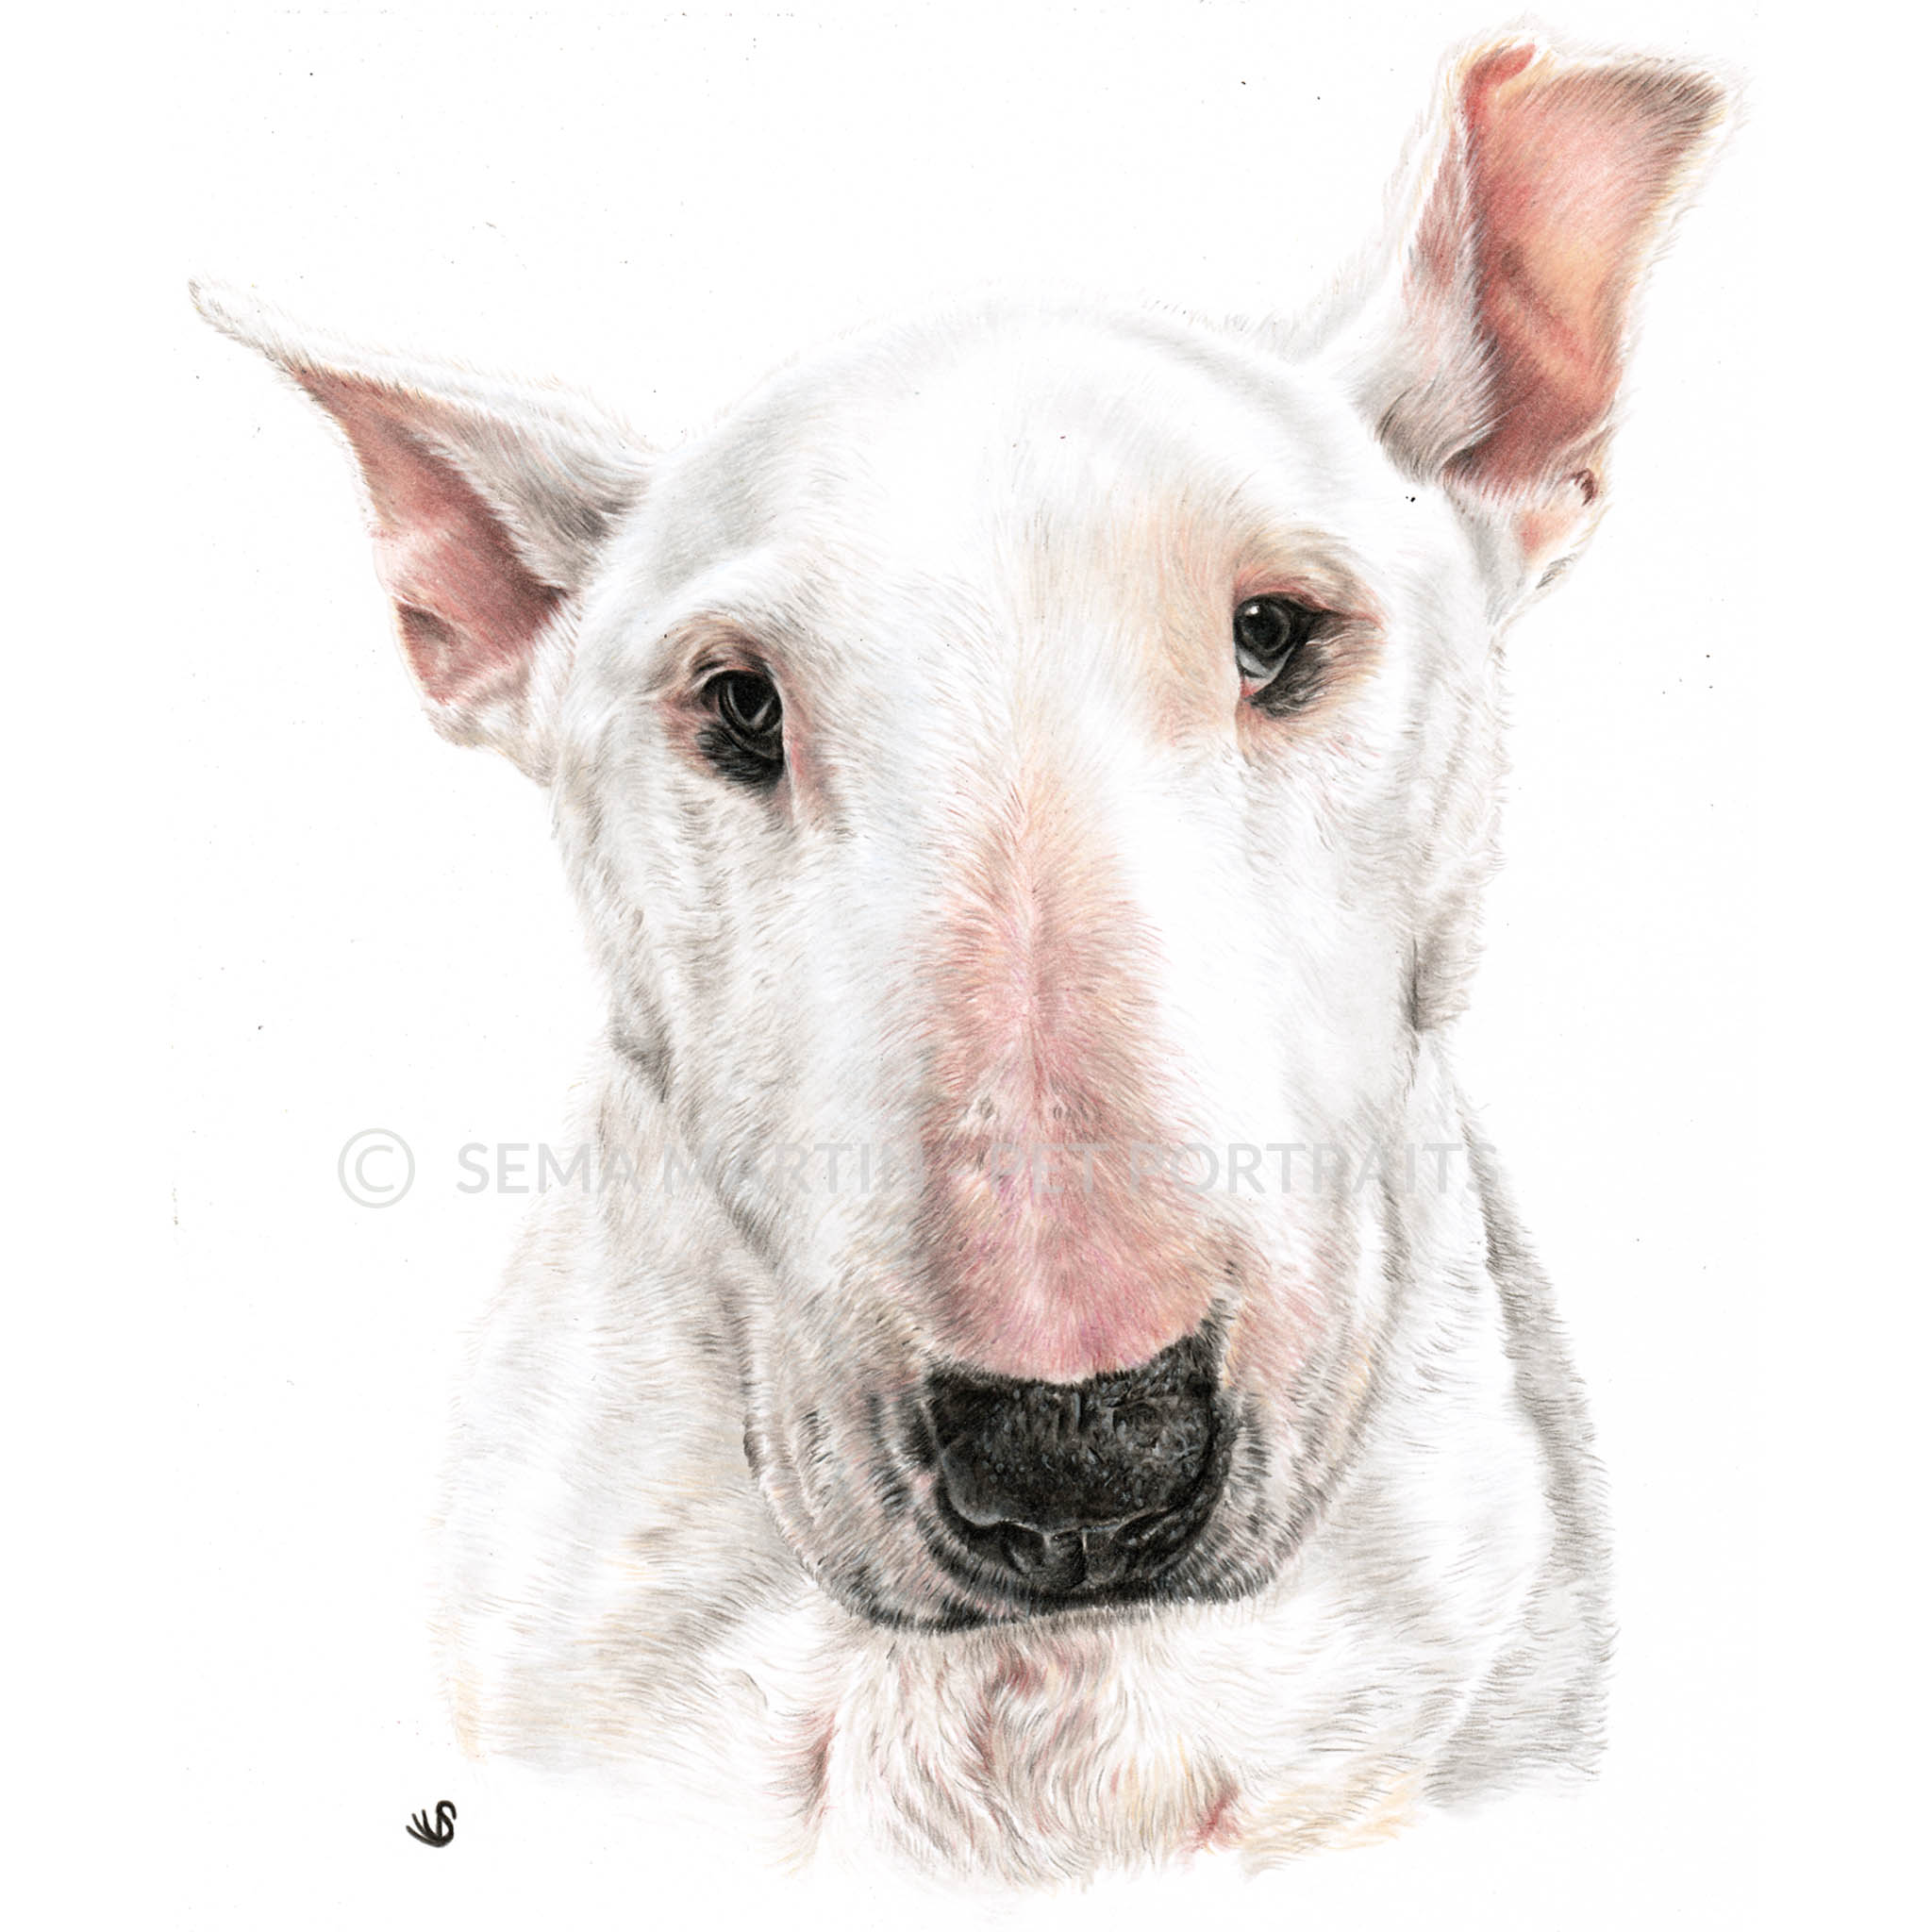 'Babbers' - UK, 8.3 x 11.7 inches, 2019, Colour Pencil Portrait of a Bull Terrier (Copy)